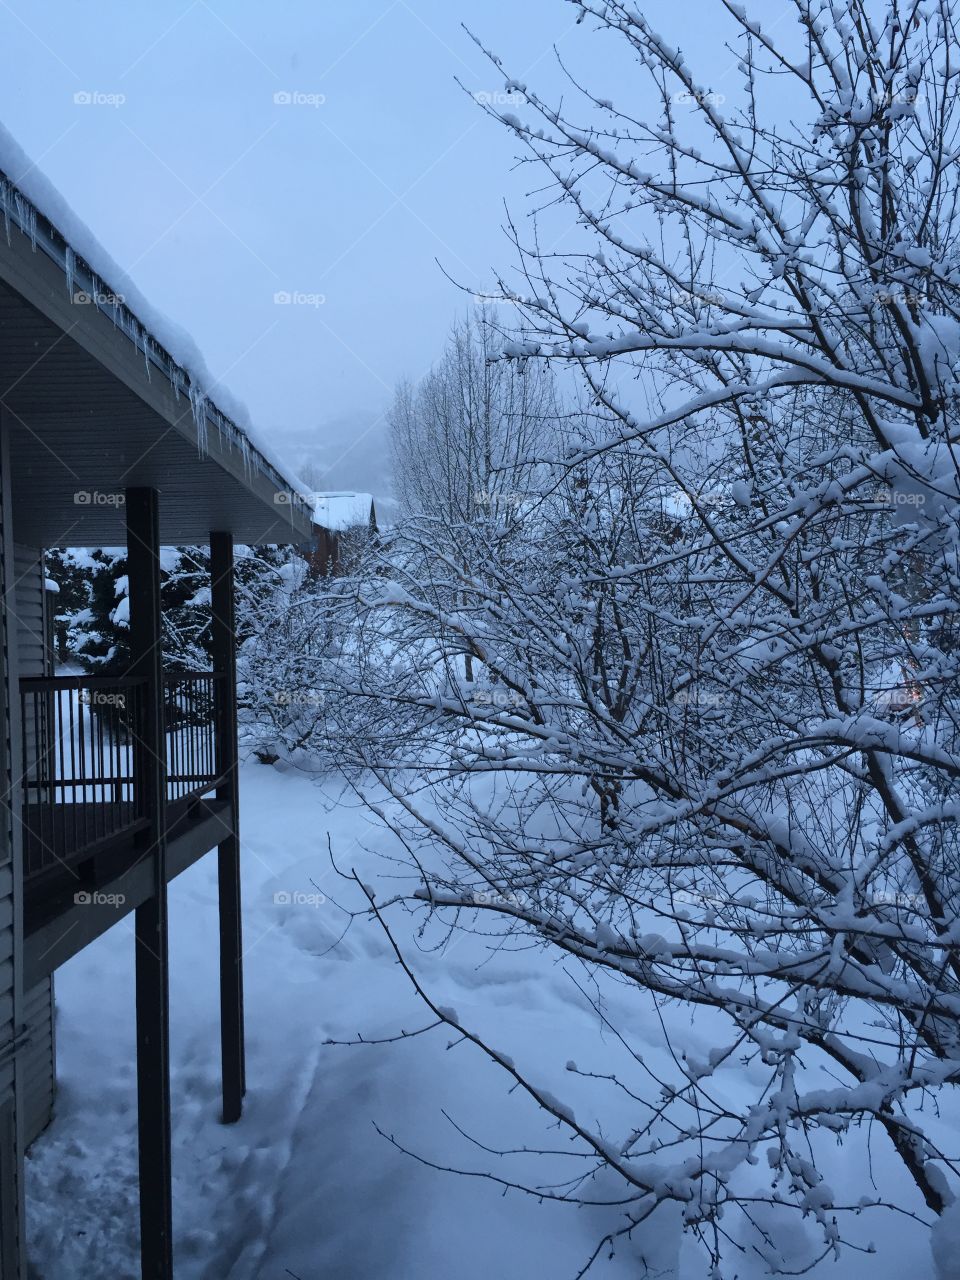 Snowy day in Steamboat Springs, Colorado. 